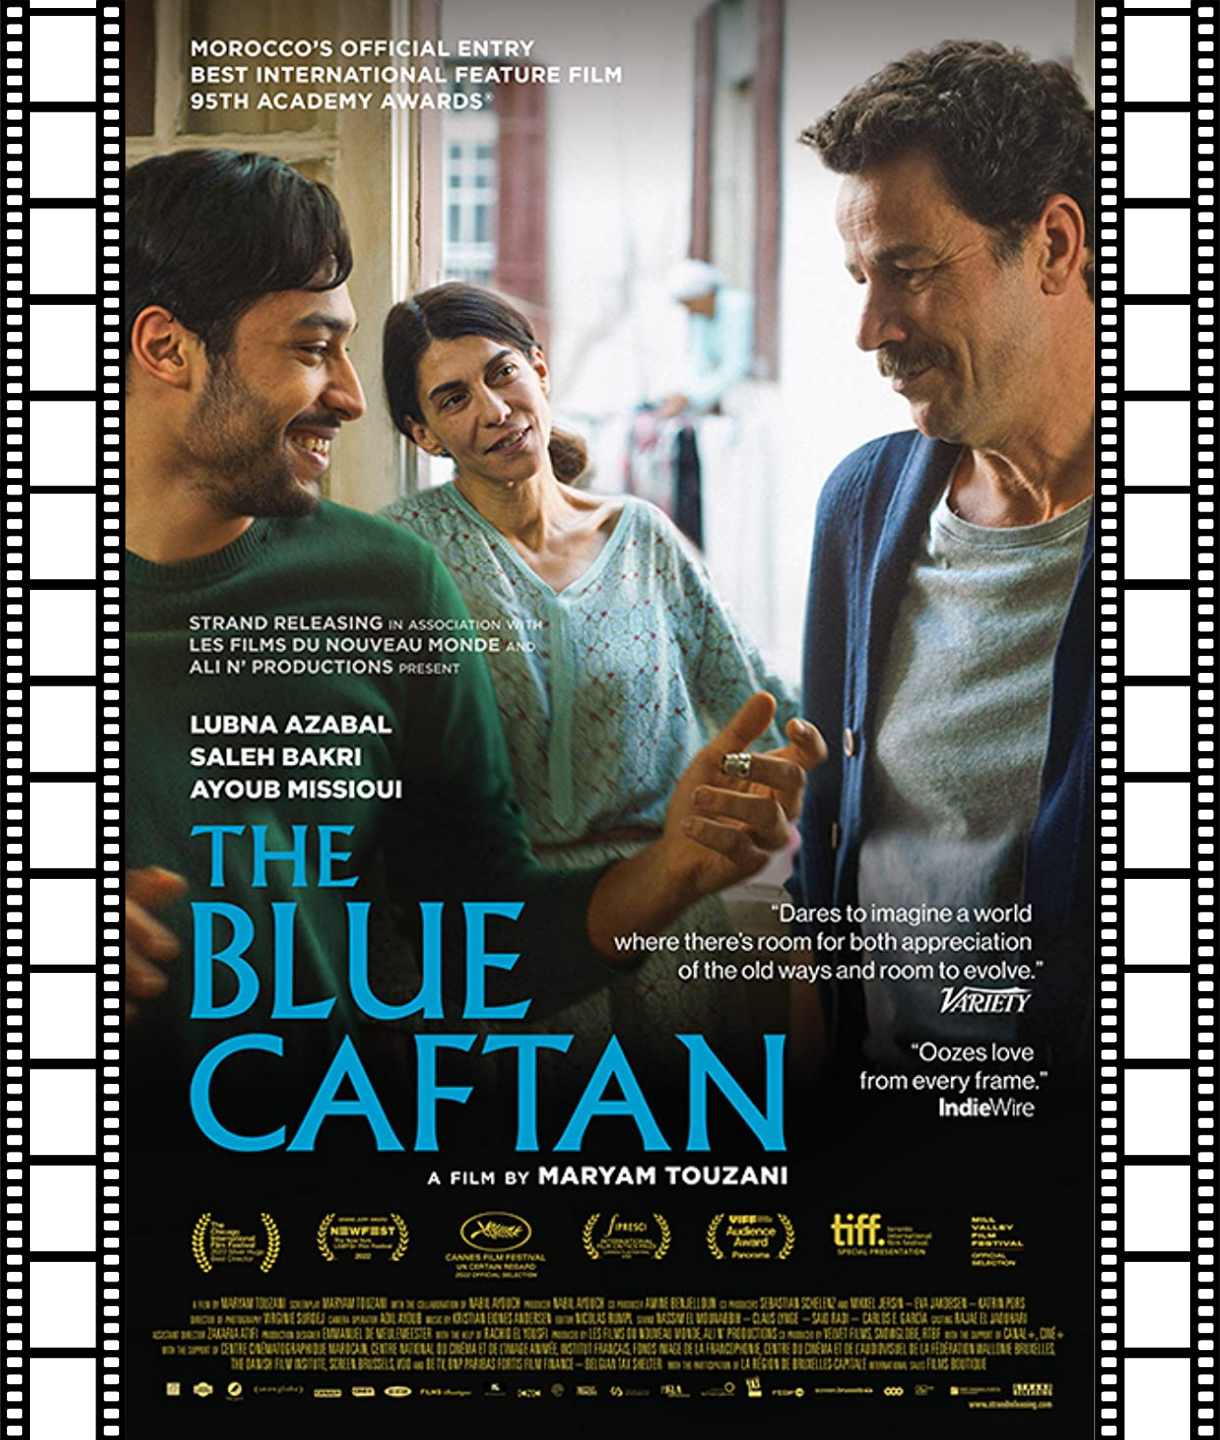 The Blue Caftan (12) Poster Image